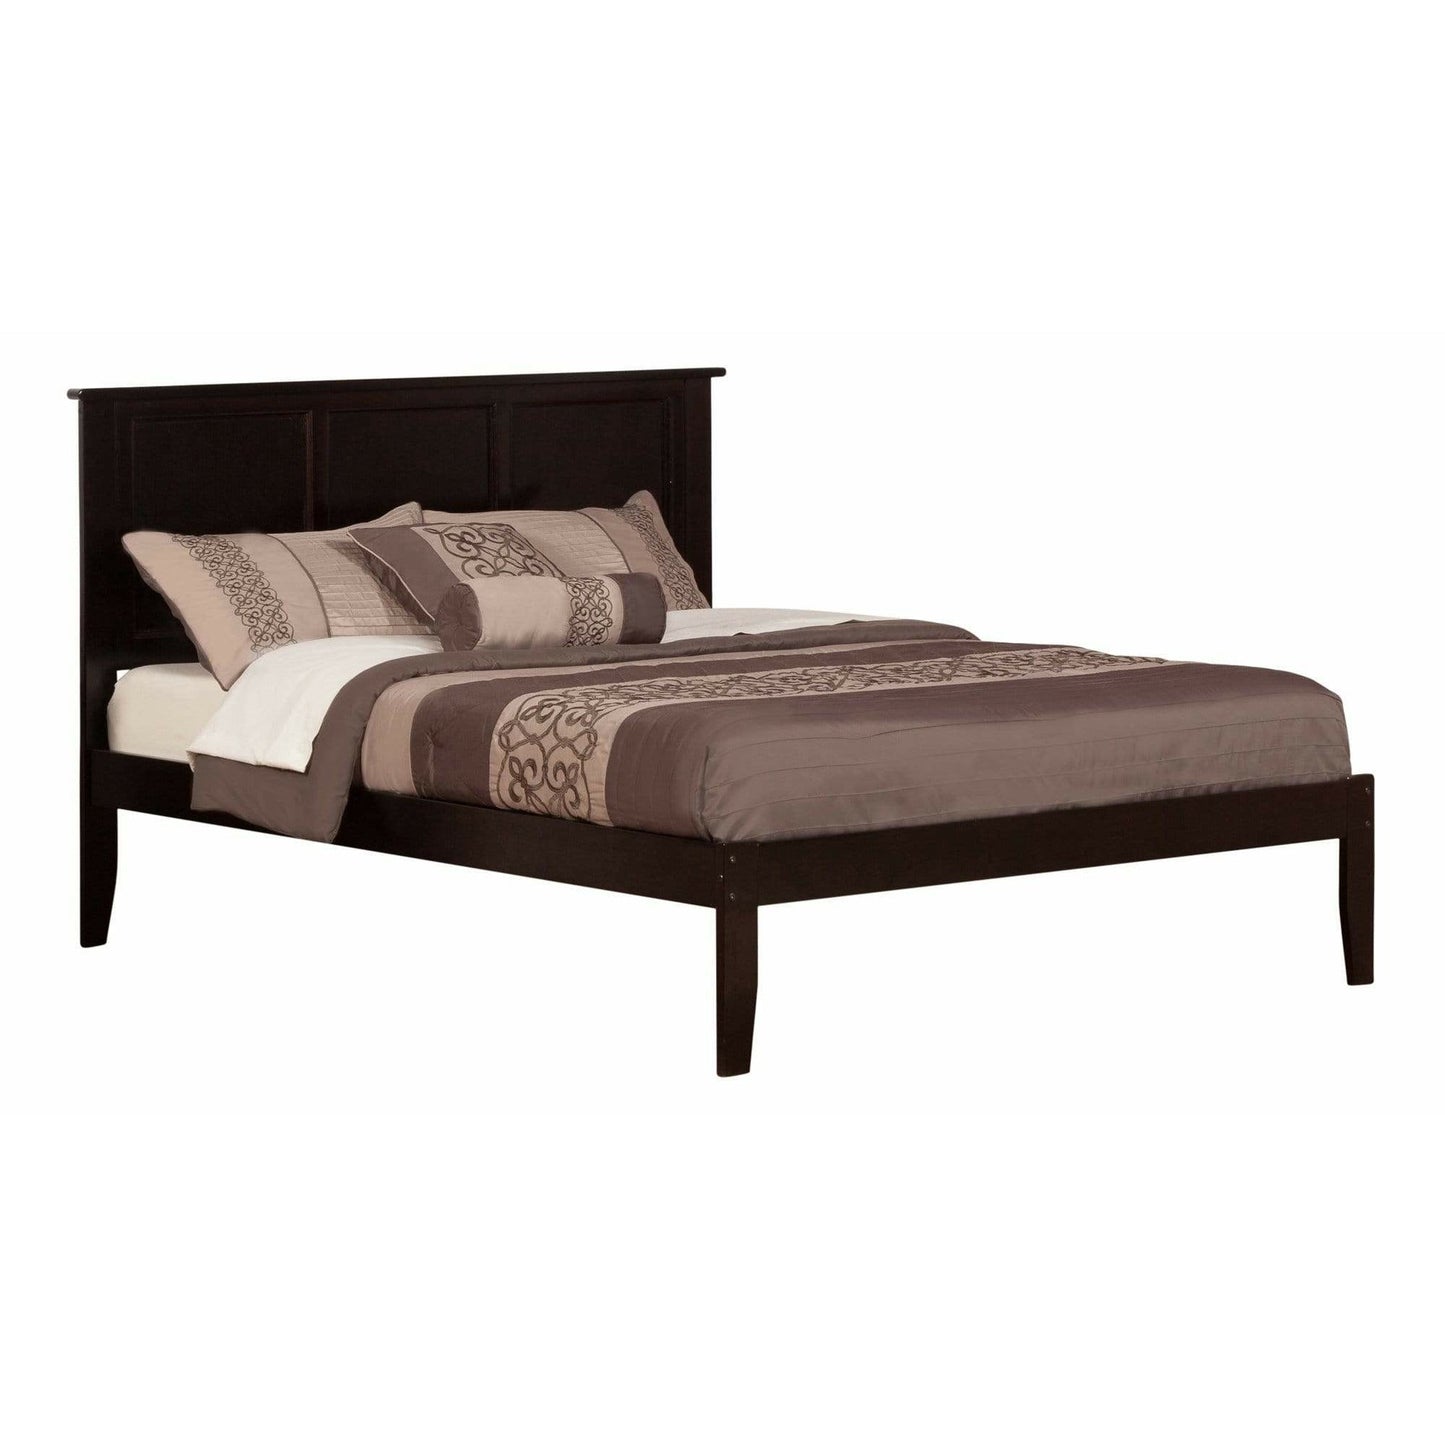 Atlantic Furniture Bed Espresso Madison King Platform Bed with Open Foot Board in Espresso